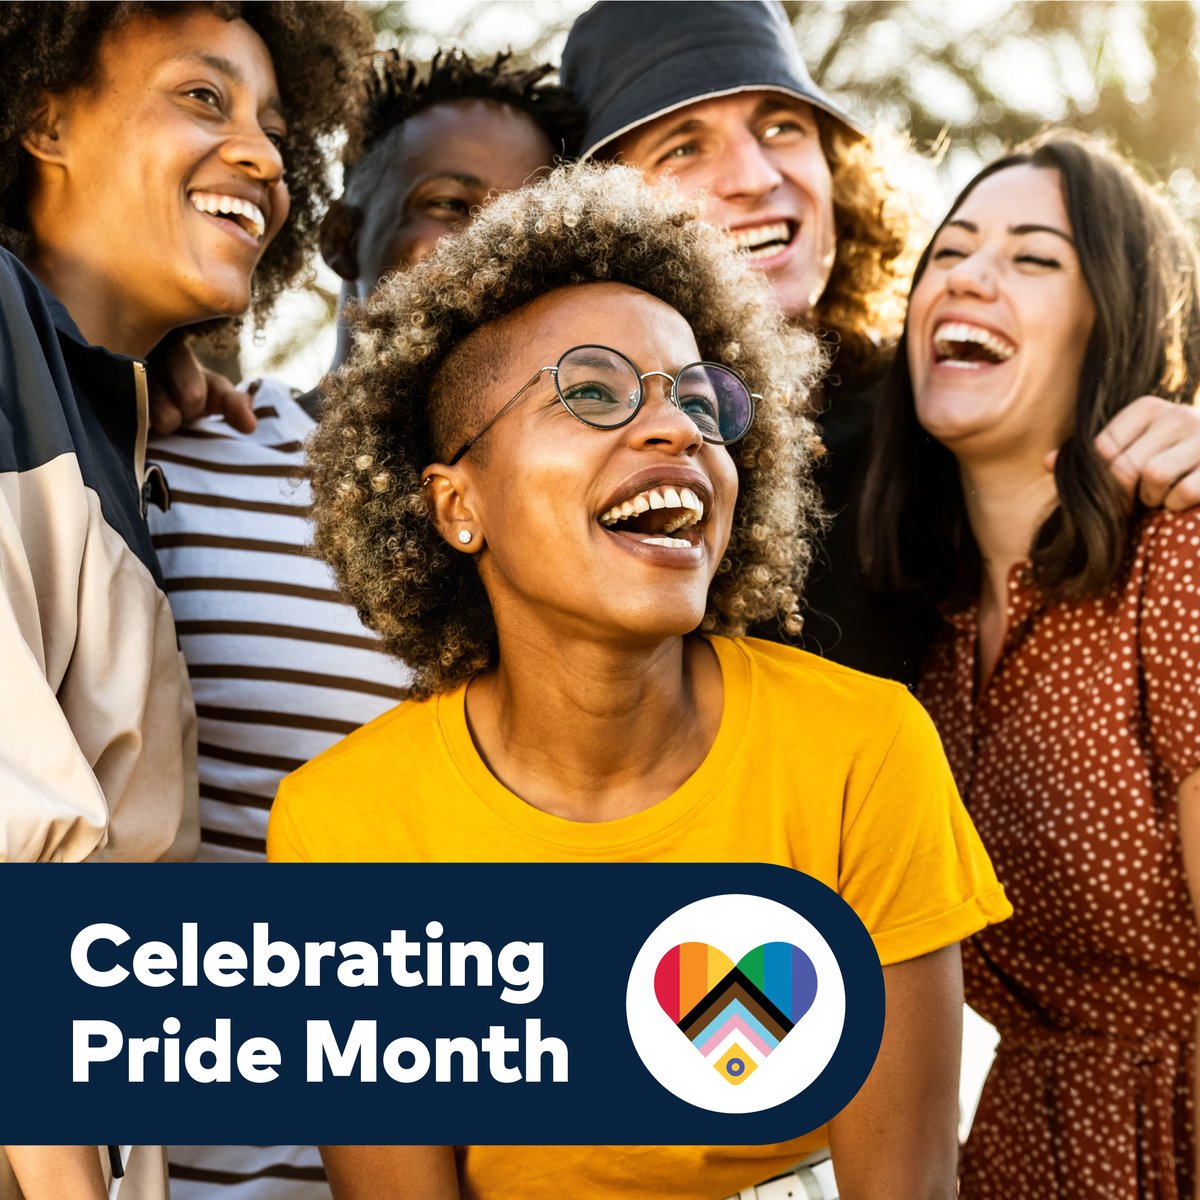 Happy Pride Month to our LGBTQ+ colleagues, patients and neighbors! We believe inclusion, compassion and equity play a critical role in HCA Healthcare’s mission to care for and improve human life. #PositiveImpact #PrideMonth